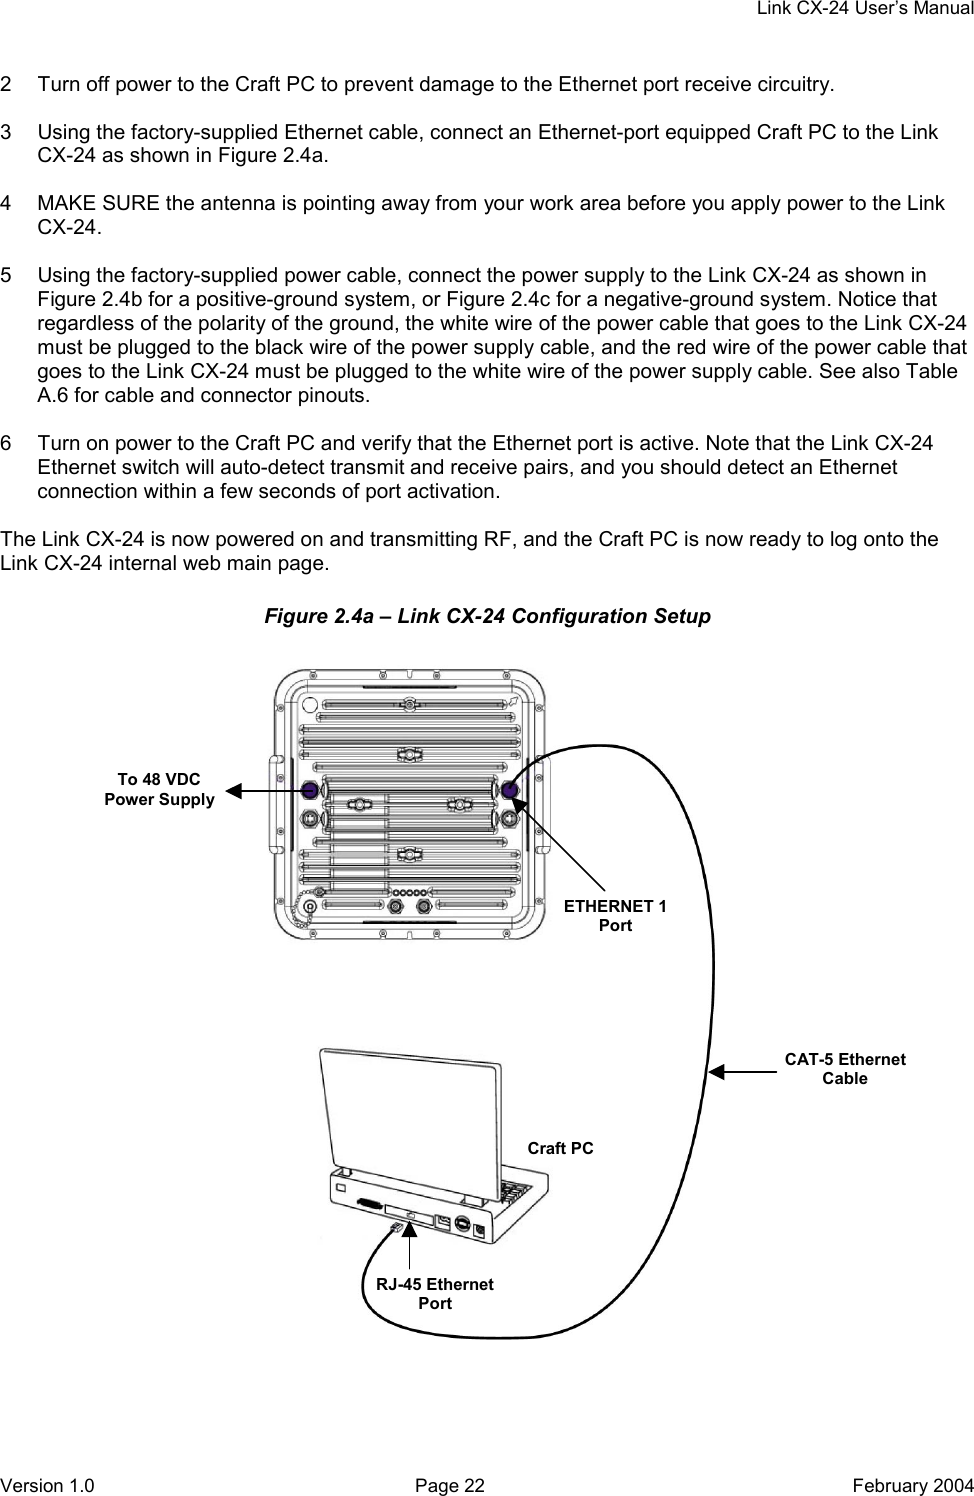     Link CX-24 User’s Manual Version 1.0  Page 22  February 2004 2  Turn off power to the Craft PC to prevent damage to the Ethernet port receive circuitry.  3  Using the factory-supplied Ethernet cable, connect an Ethernet-port equipped Craft PC to the Link CX-24 as shown in Figure 2.4a.  4  MAKE SURE the antenna is pointing away from your work area before you apply power to the Link CX-24.  5  Using the factory-supplied power cable, connect the power supply to the Link CX-24 as shown in Figure 2.4b for a positive-ground system, or Figure 2.4c for a negative-ground system. Notice that regardless of the polarity of the ground, the white wire of the power cable that goes to the Link CX-24 must be plugged to the black wire of the power supply cable, and the red wire of the power cable that goes to the Link CX-24 must be plugged to the white wire of the power supply cable. See also Table A.6 for cable and connector pinouts.  6  Turn on power to the Craft PC and verify that the Ethernet port is active. Note that the Link CX-24 Ethernet switch will auto-detect transmit and receive pairs, and you should detect an Ethernet connection within a few seconds of port activation.  The Link CX-24 is now powered on and transmitting RF, and the Craft PC is now ready to log onto the Link CX-24 internal web main page. Figure 2.4a – Link CX-24 Configuration Setup  CAT-5 Ethernet Cable Craft PCRJ-45 Ethernet Port ETHERNET 1 Port To 48 VDC Power Supply 